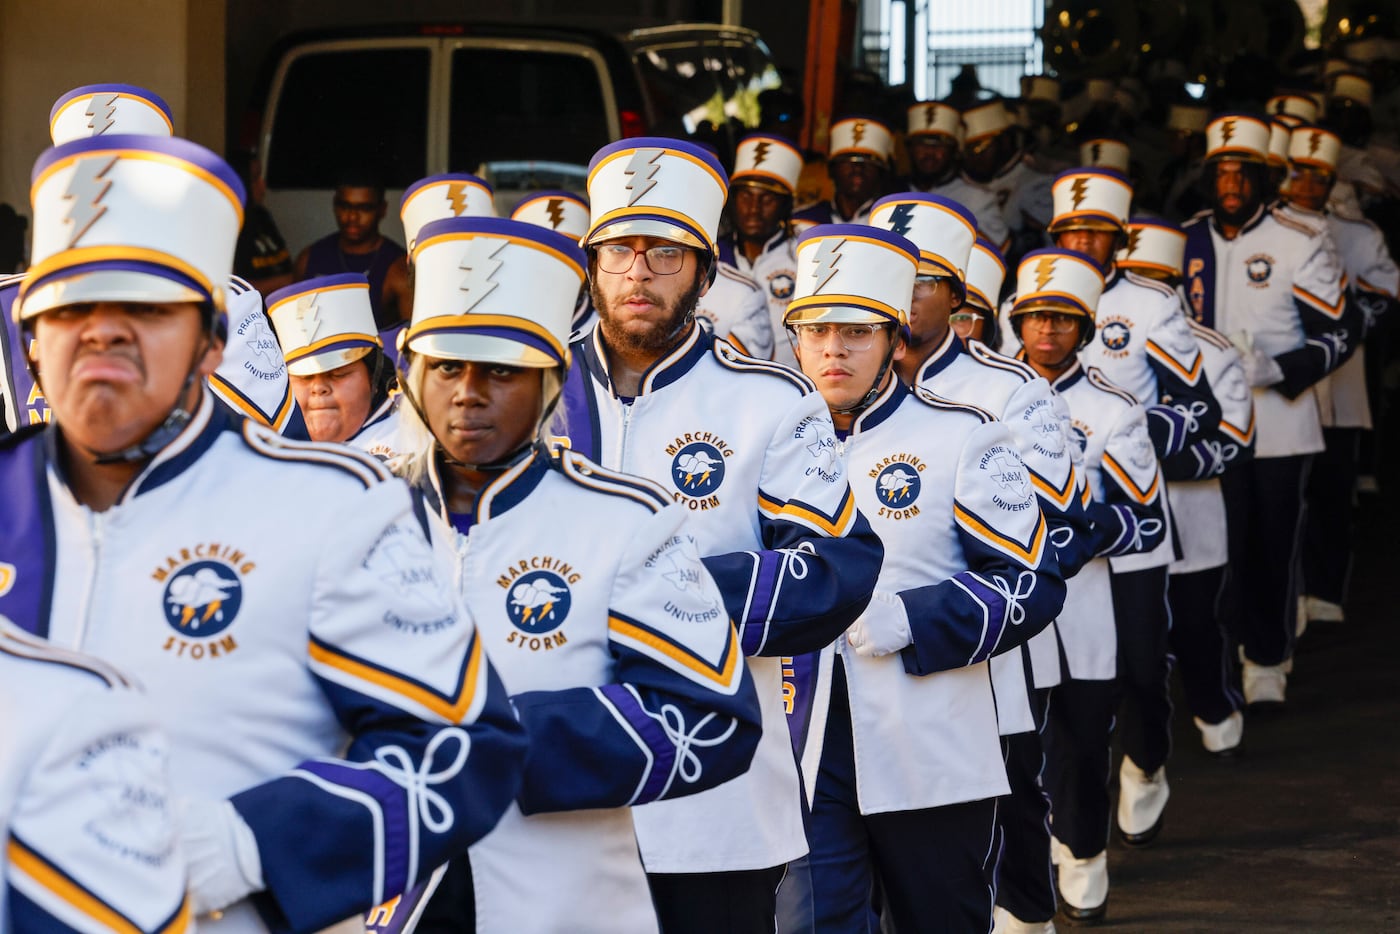 The Prairie View A&M marching band enters the Cotton Bowl before the State Fair Classic...